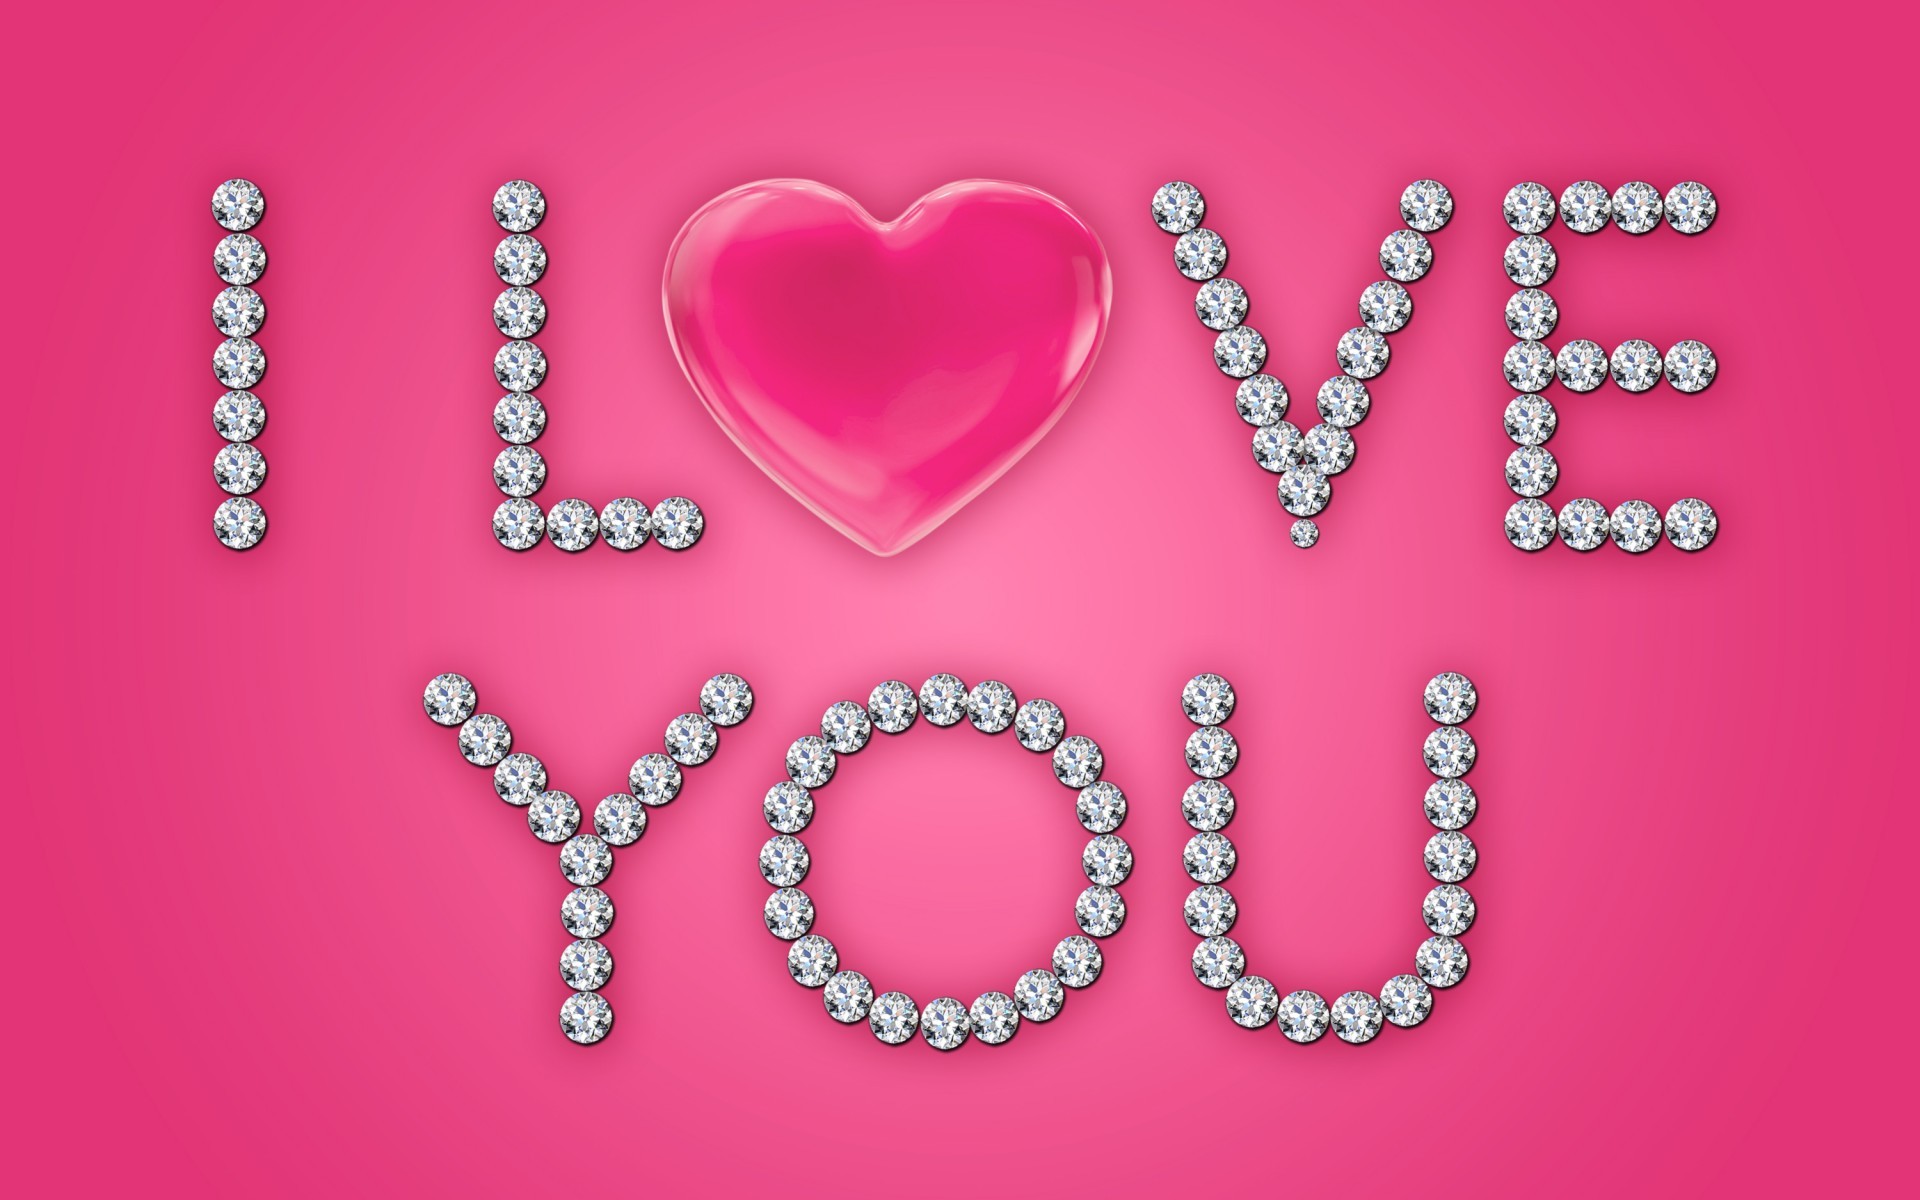 I Love You Diamonds Pink Heart wallpapers and stock photos